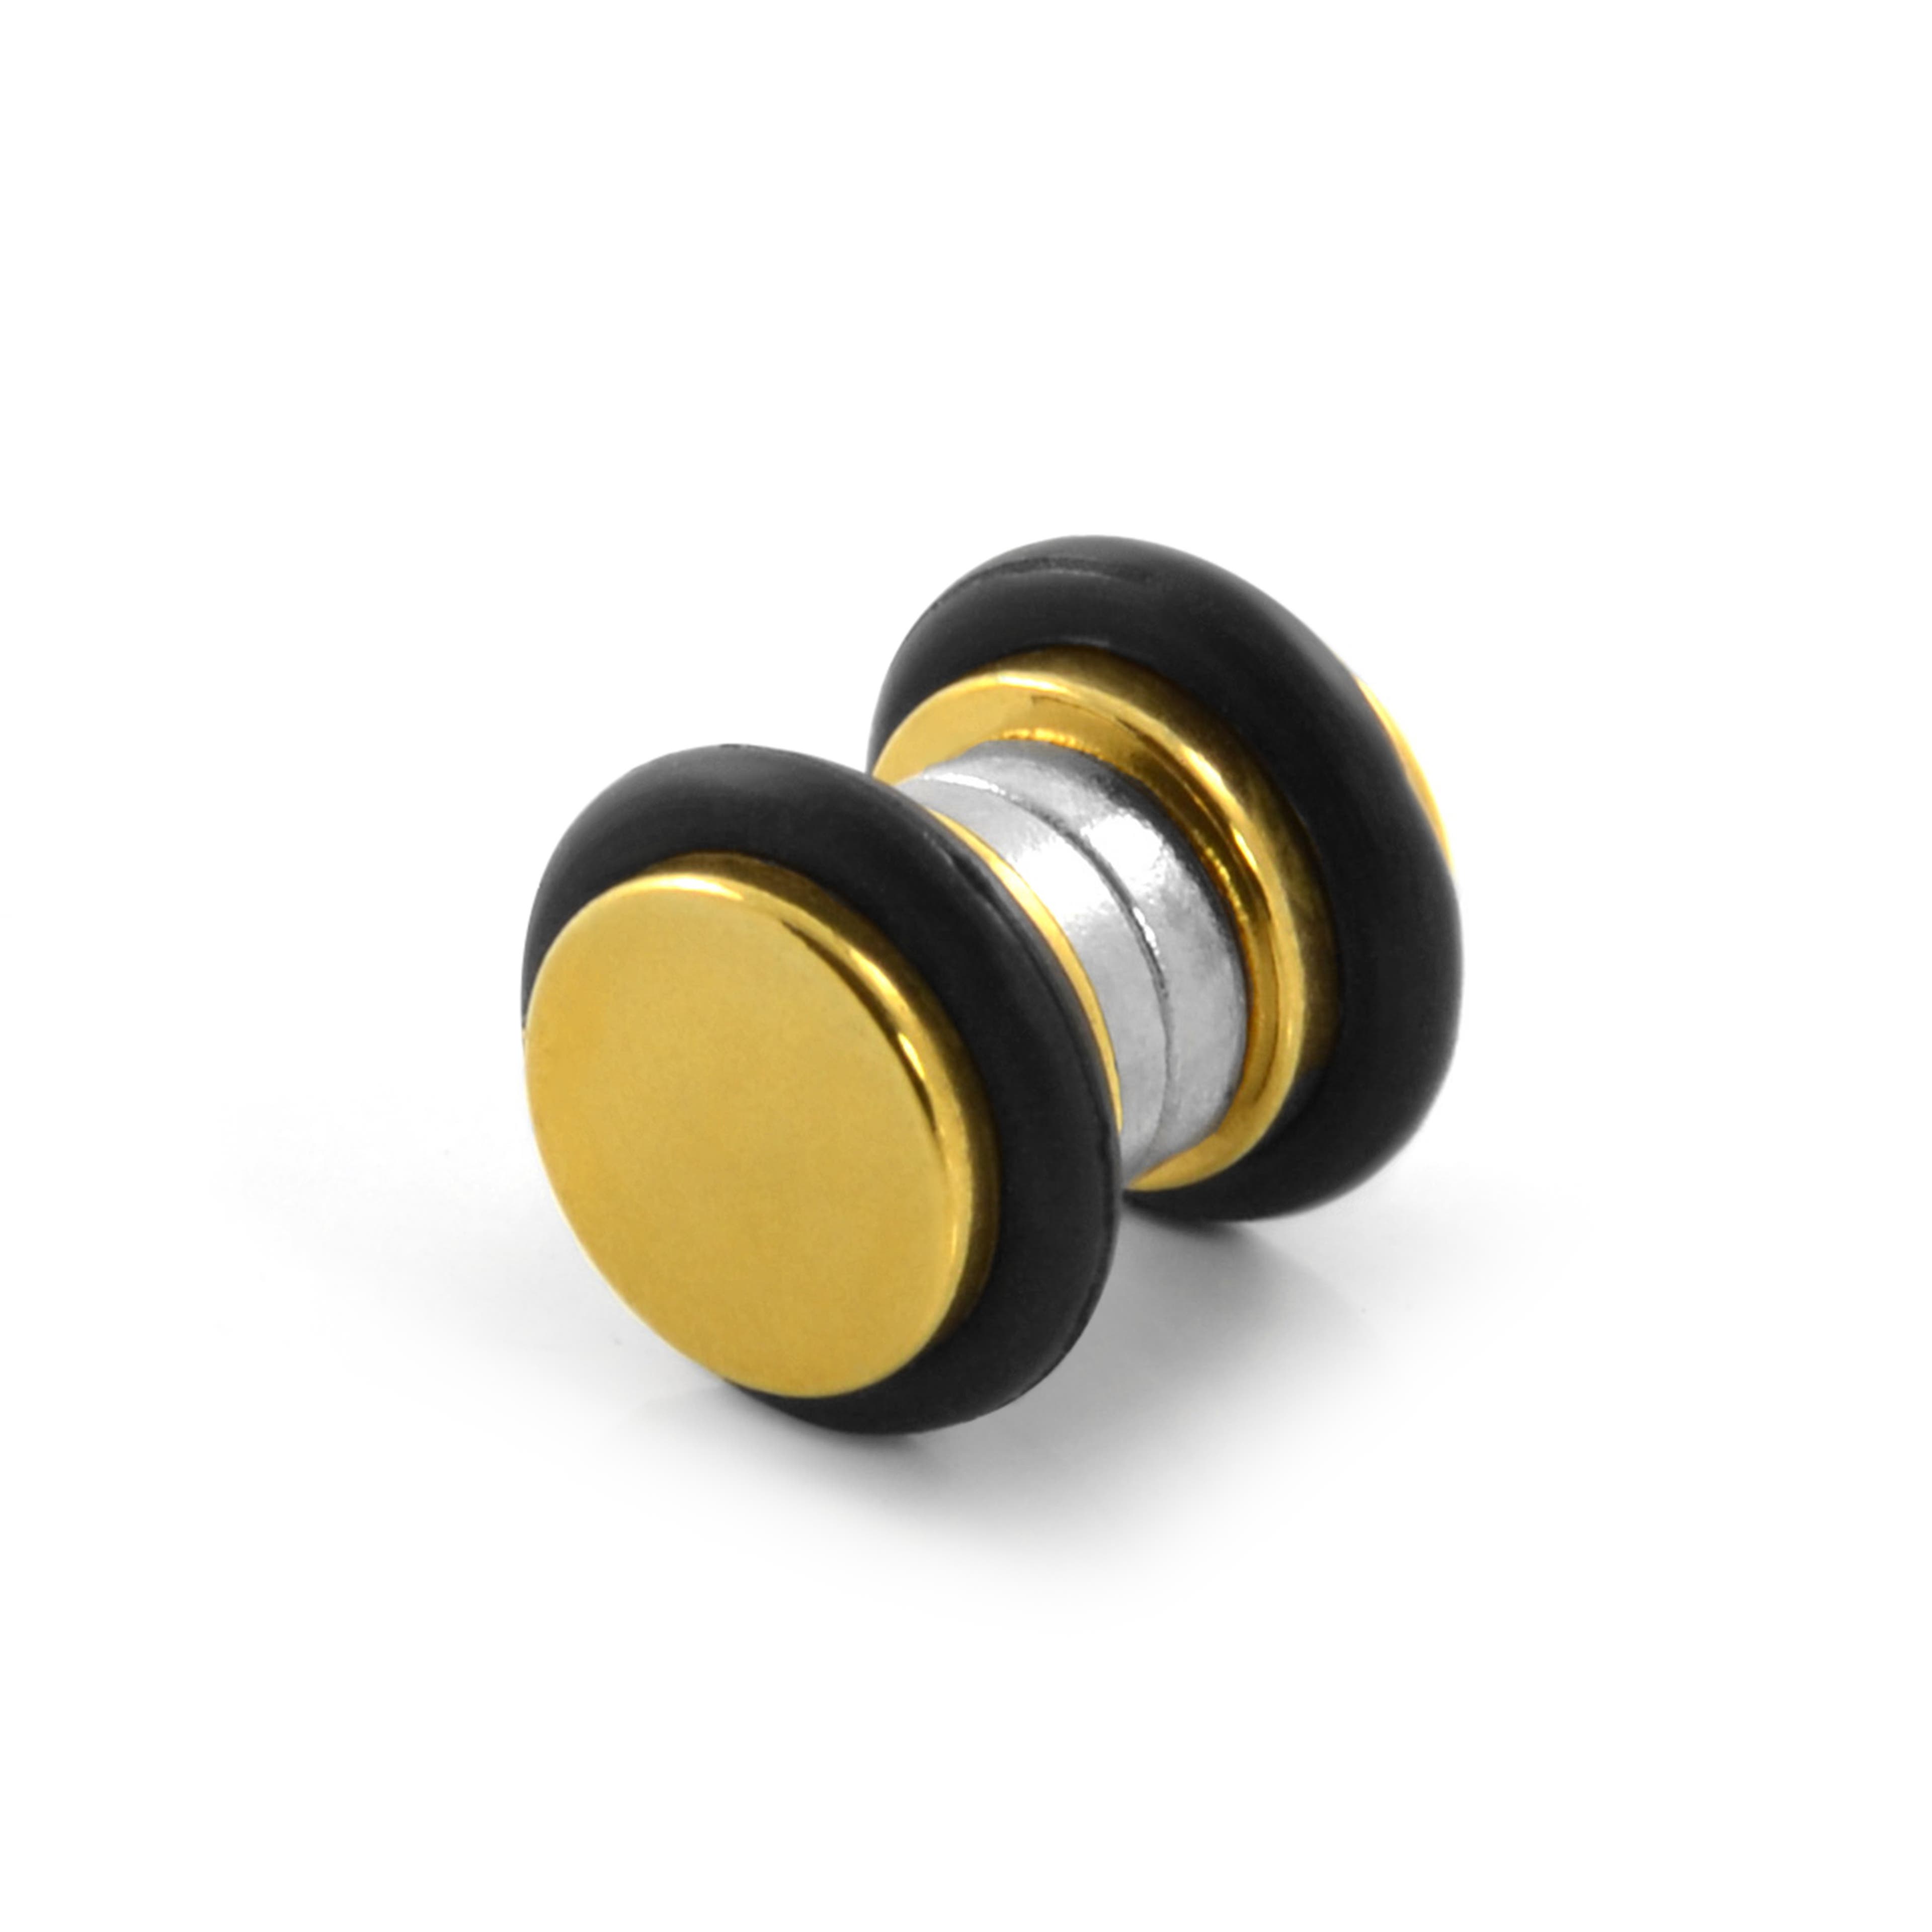 6 mm Gold-Tone & Black Rubber Magnetic Earring